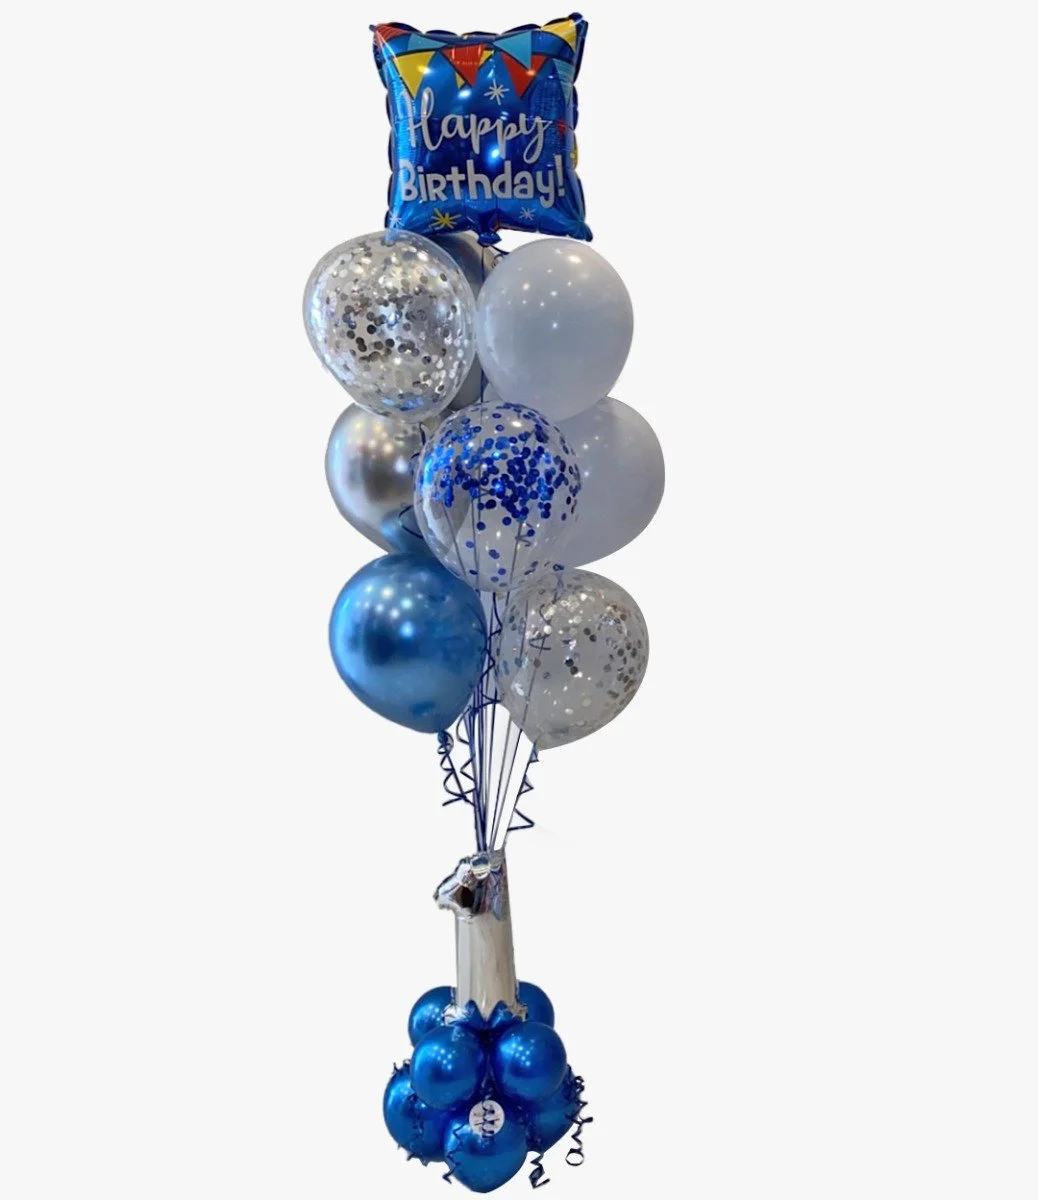 Blue Birthday Balloon Arrangment with Number/Letter 